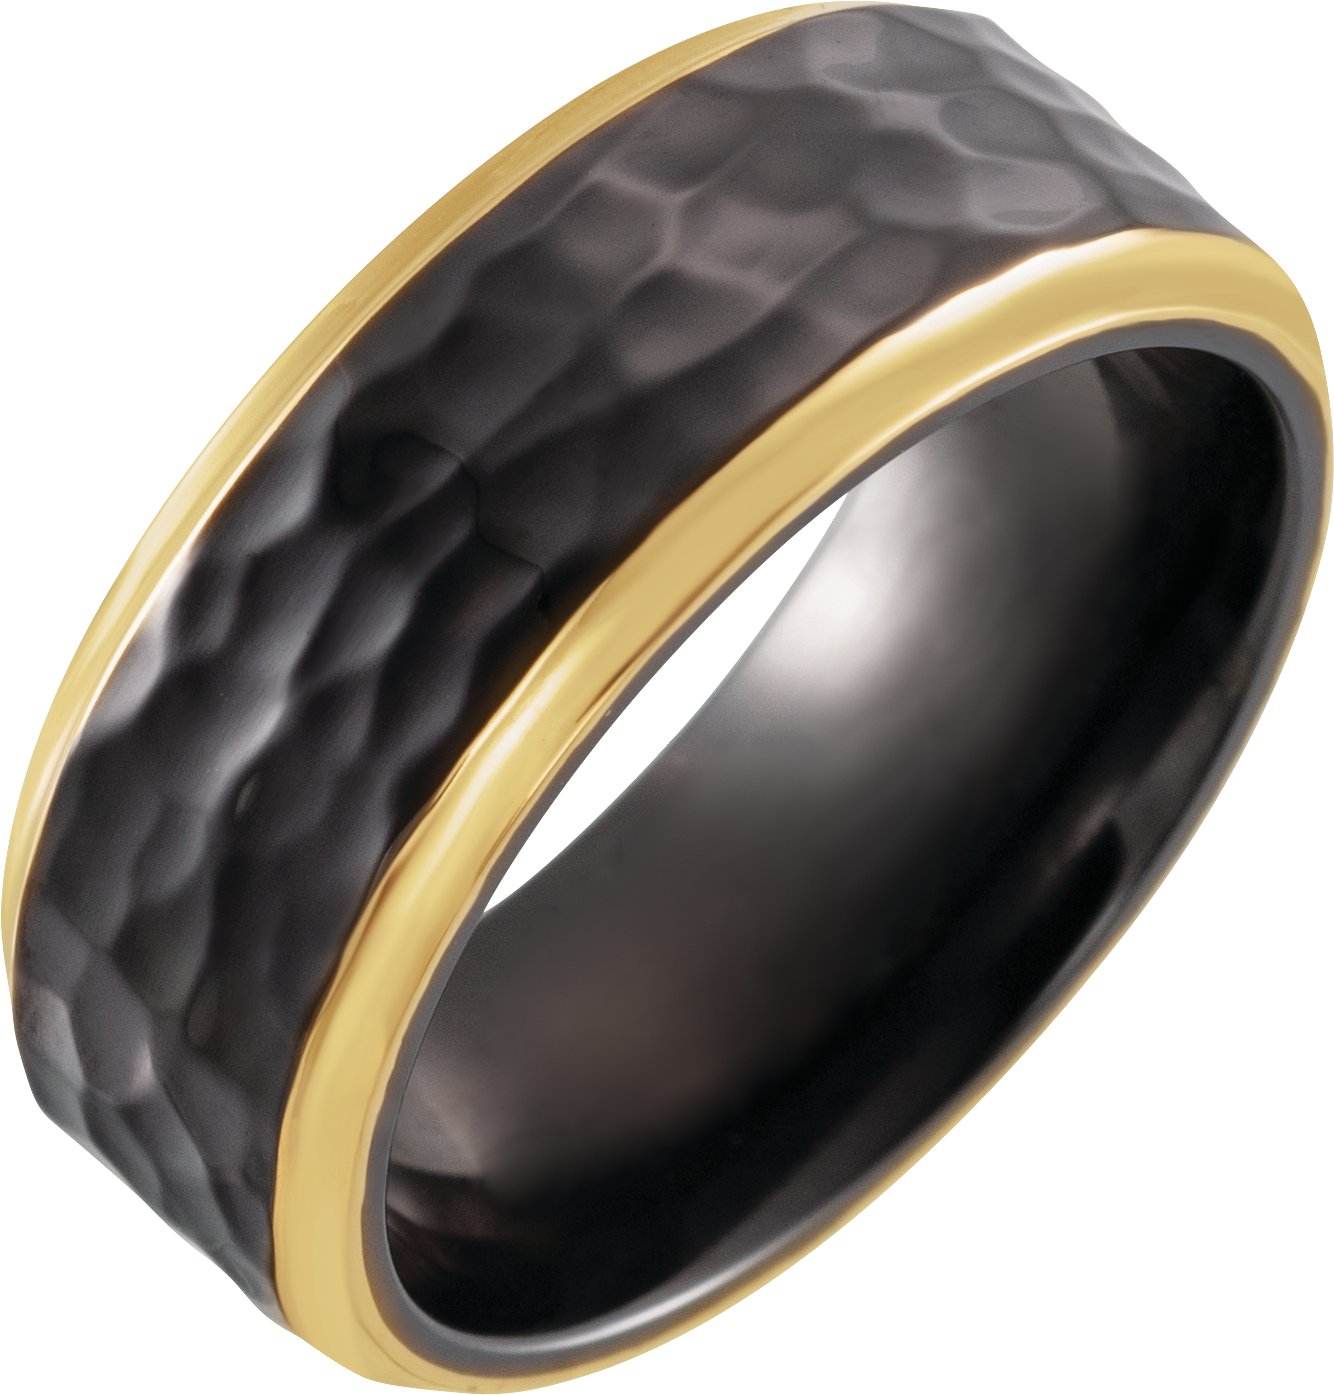 18K Yellow Gold PVD Black Titanium 8 mm Flat Size 8.5 Band with Hammer Finish